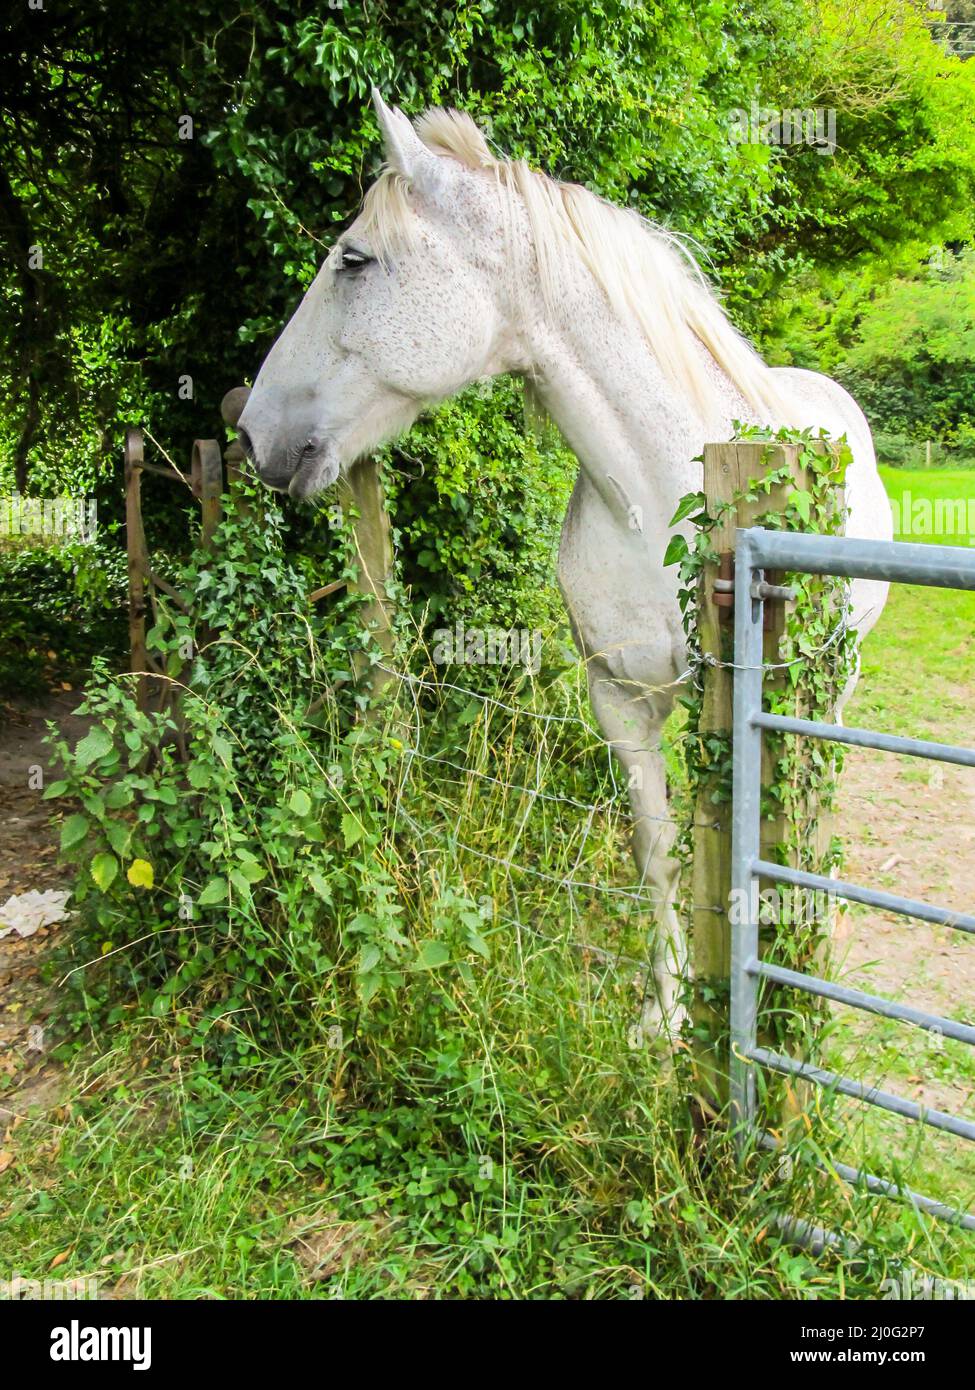 A single white horse looking over the fence, just outside the small town of Wendover, in the Chilterns, rural England Stock Photo